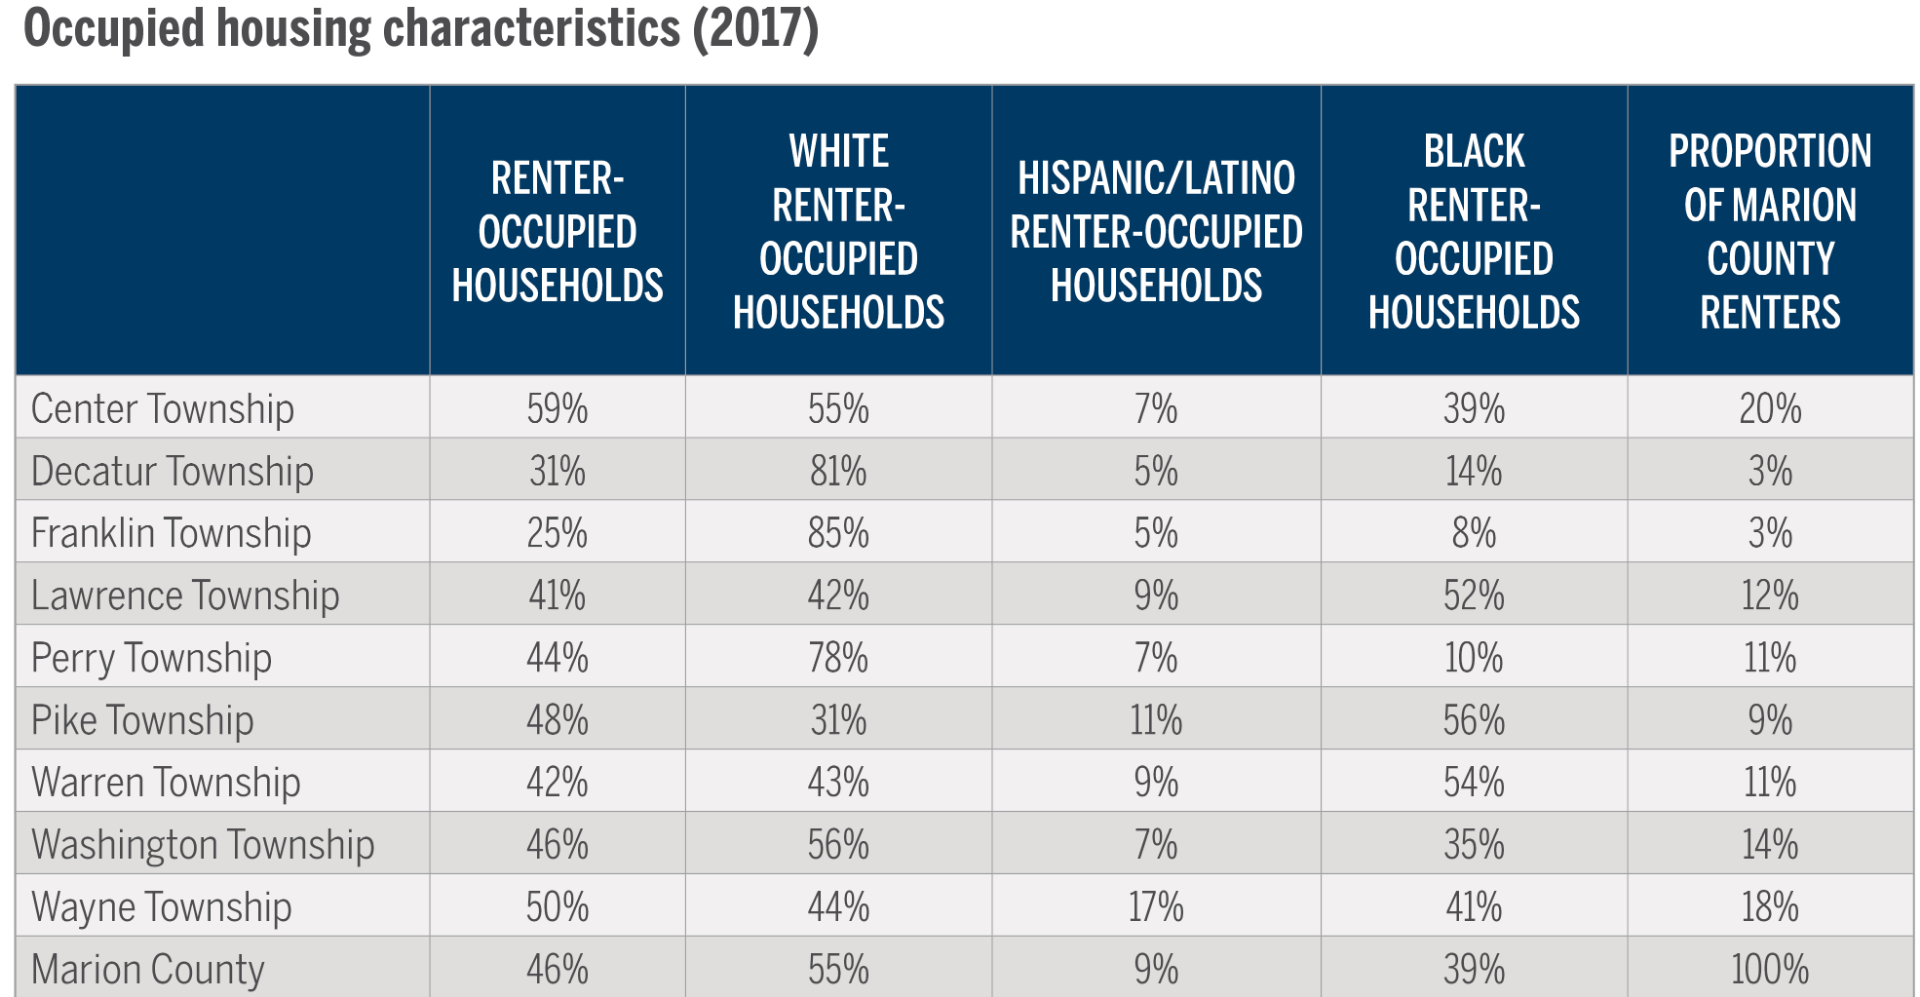 Information on Renter-occupied households in Marion County